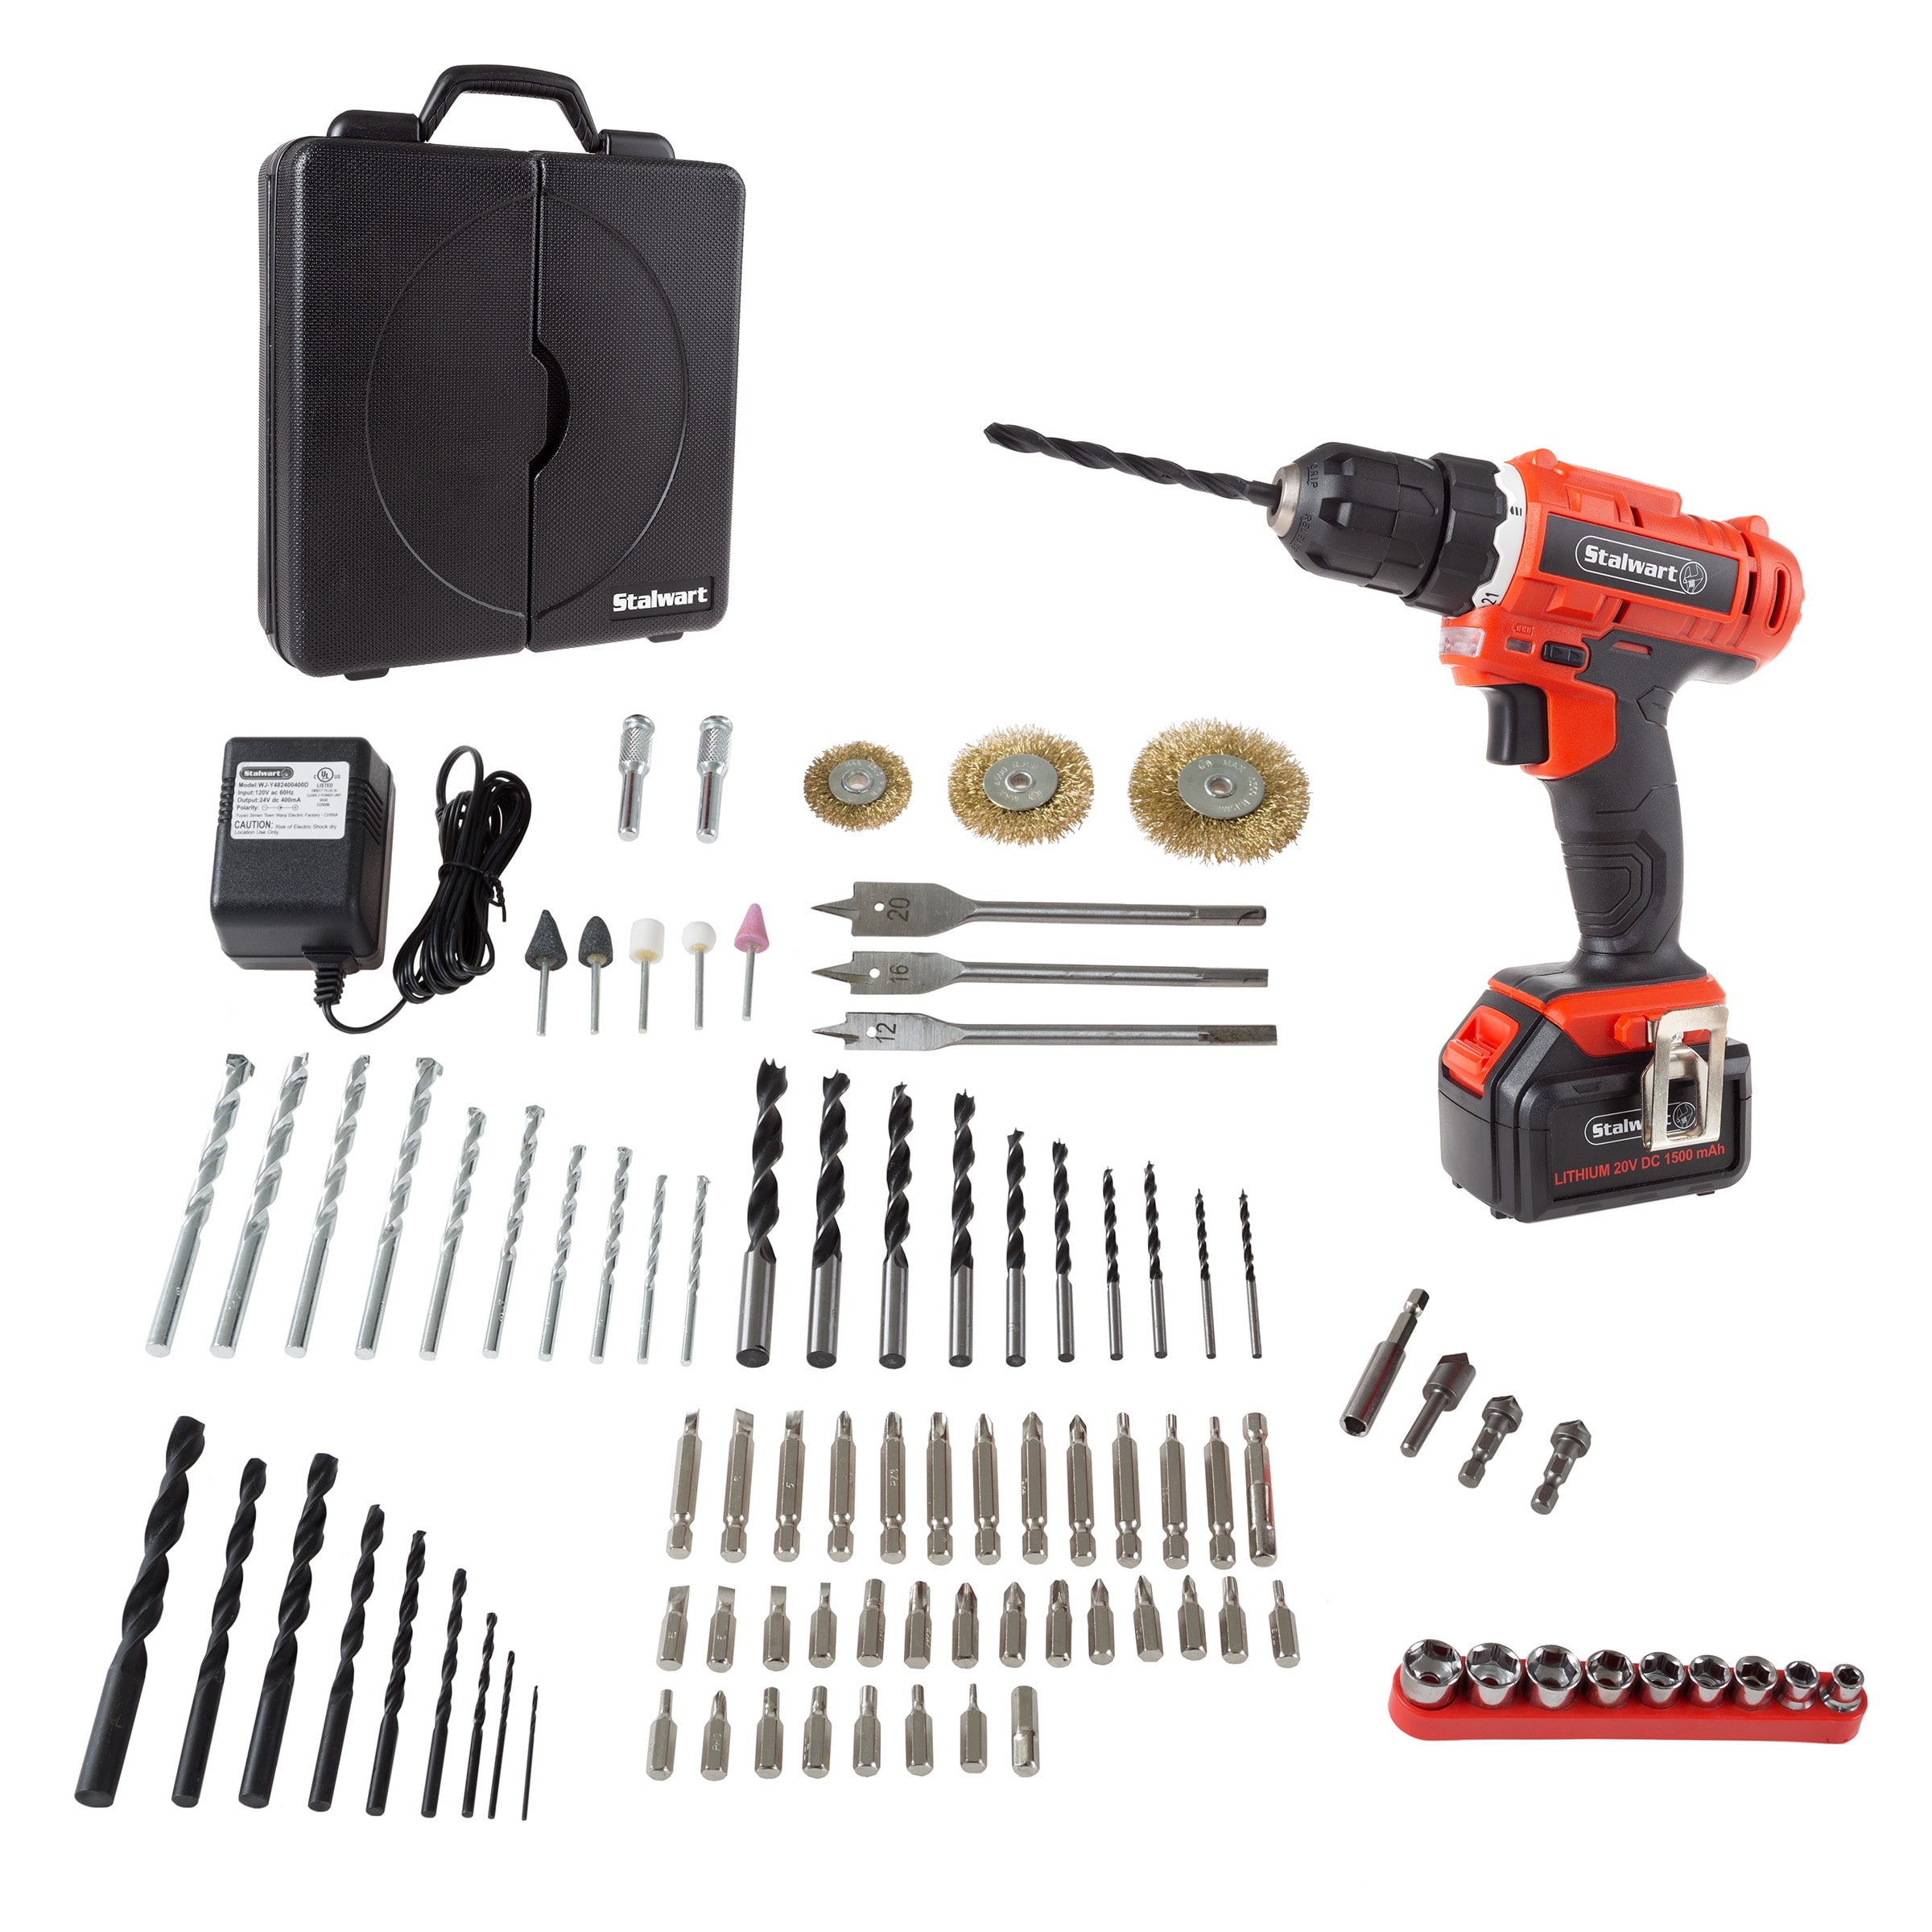 Fleming Supply 25-piece Cordless Screwdriver Set With Comfort Grip